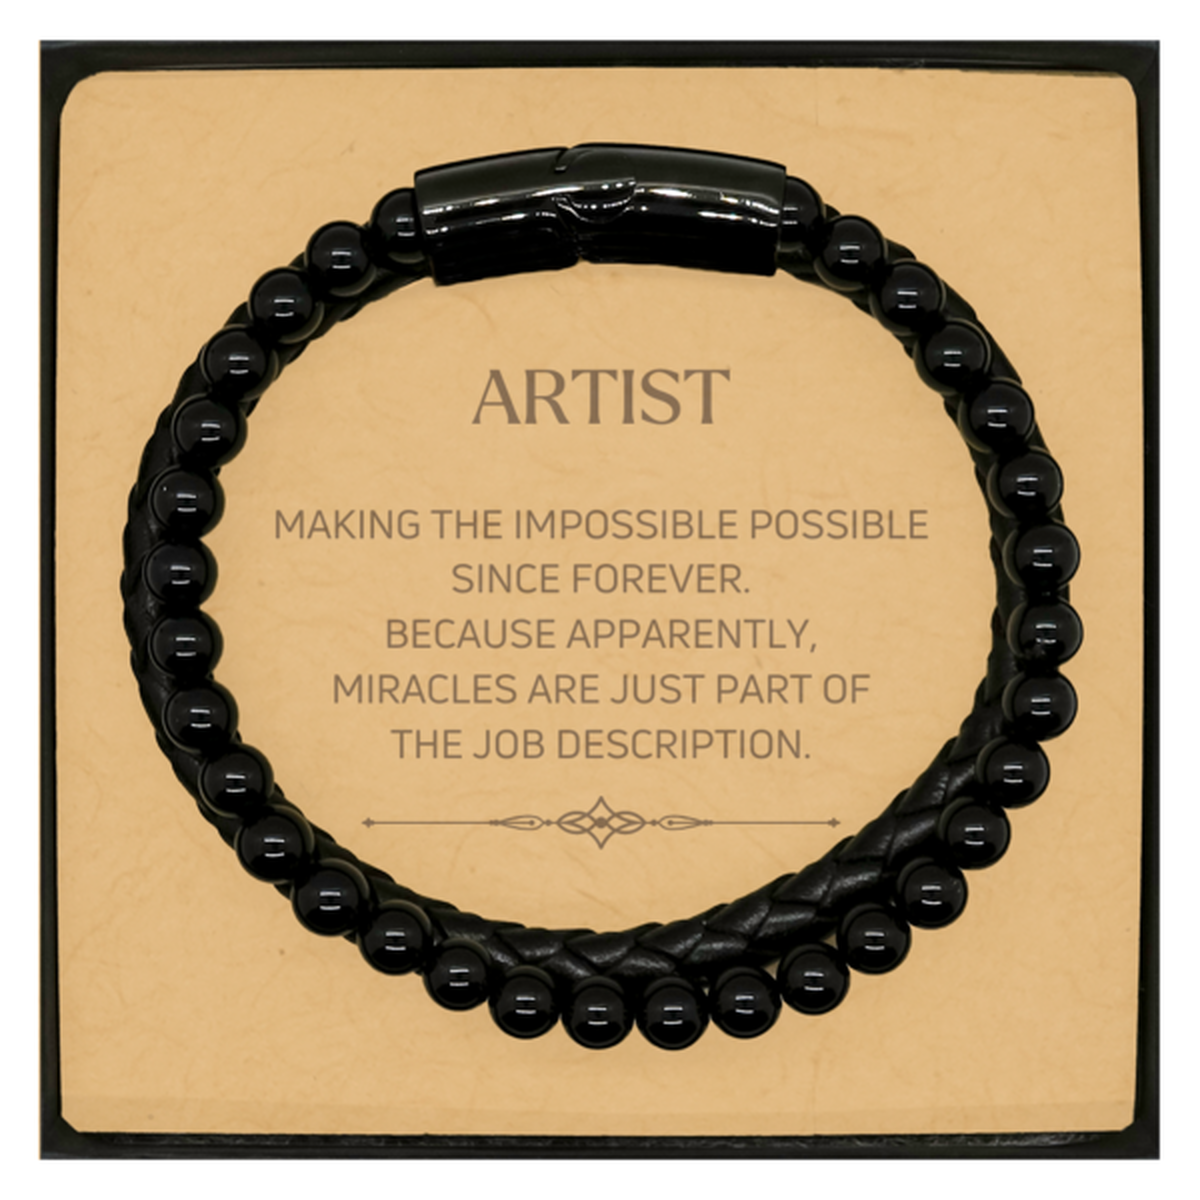 Funny Artist Gifts, Miracles are just part of the job description, Inspirational Birthday Christmas Stone Leather Bracelets For Artist, Men, Women, Coworkers, Friends, Boss